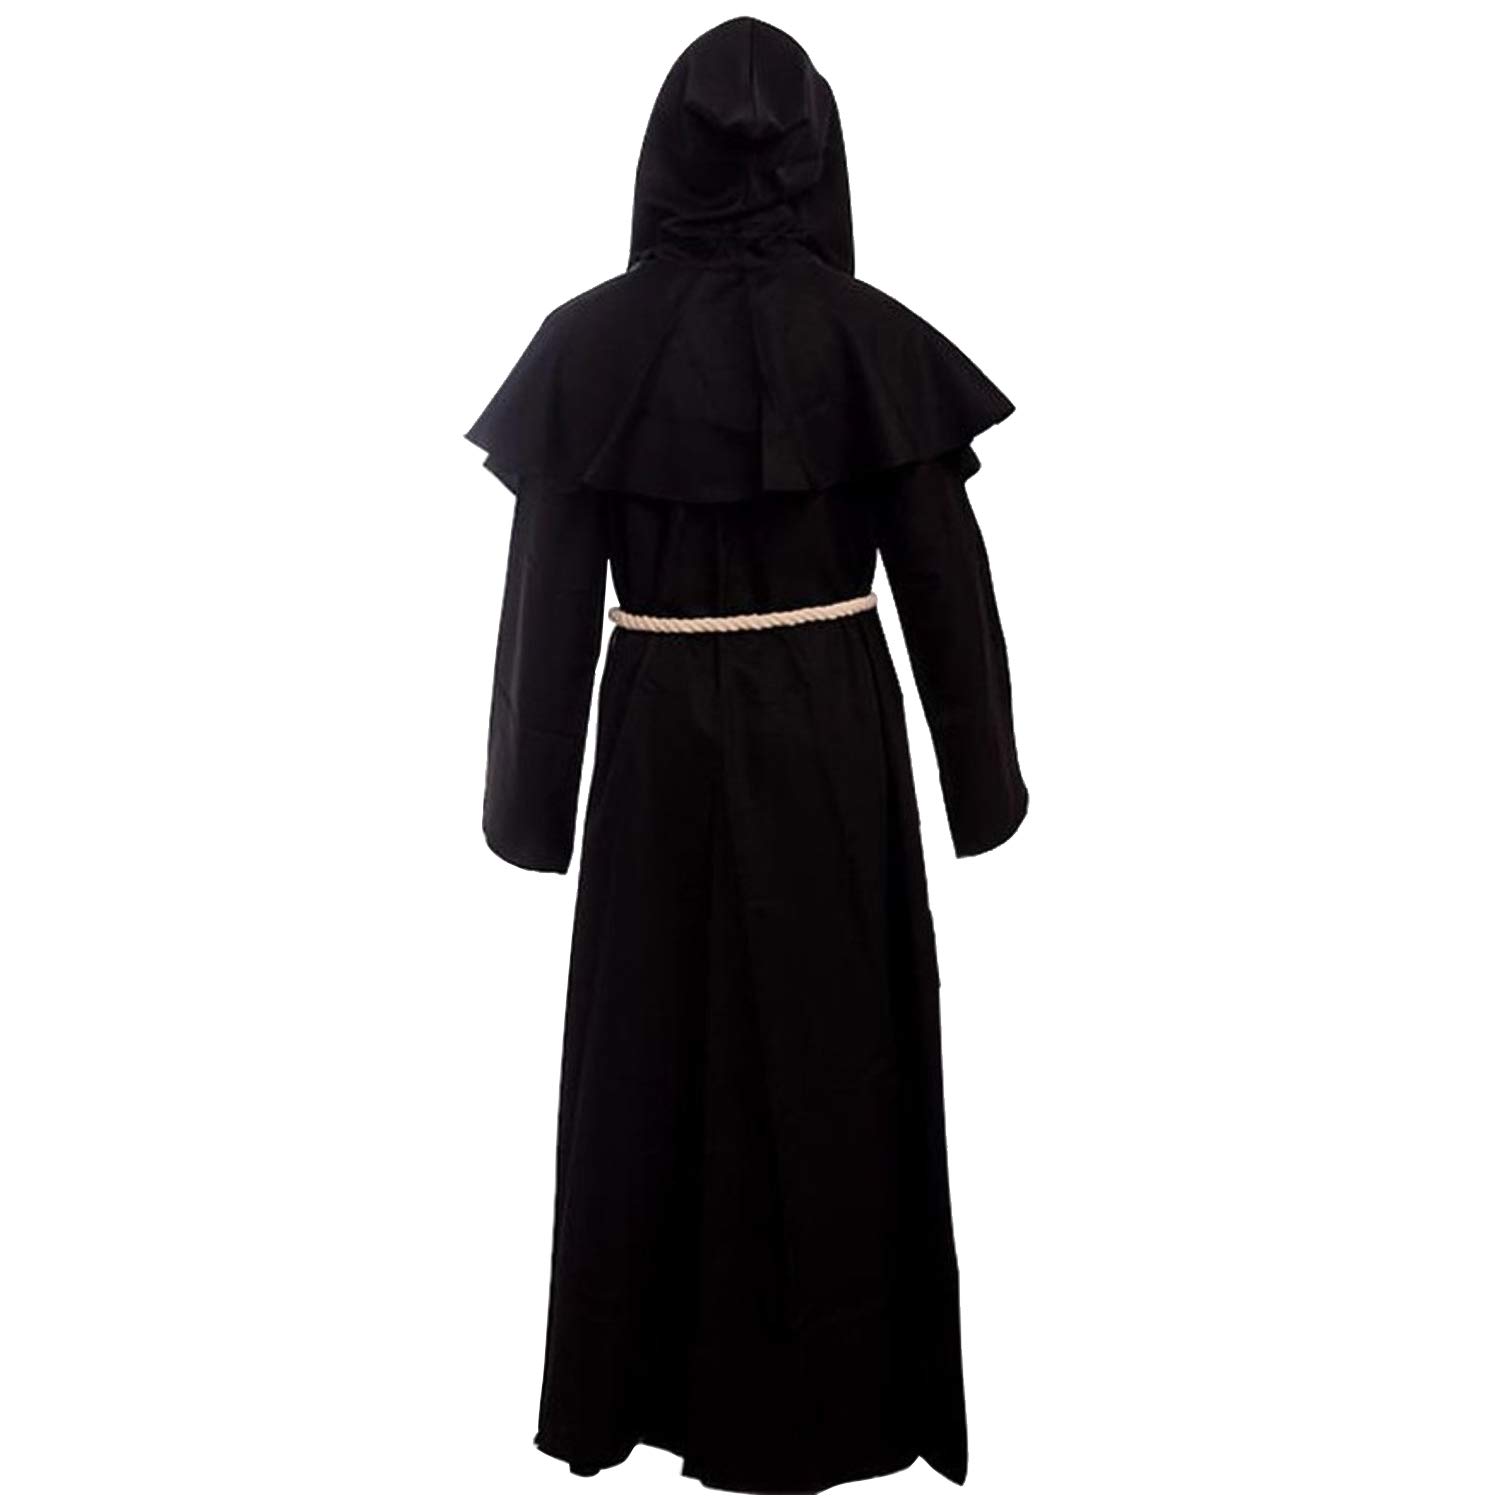 Medieval monks' robes, monks' robes, wizards' robes, priest's robes, performance costumes